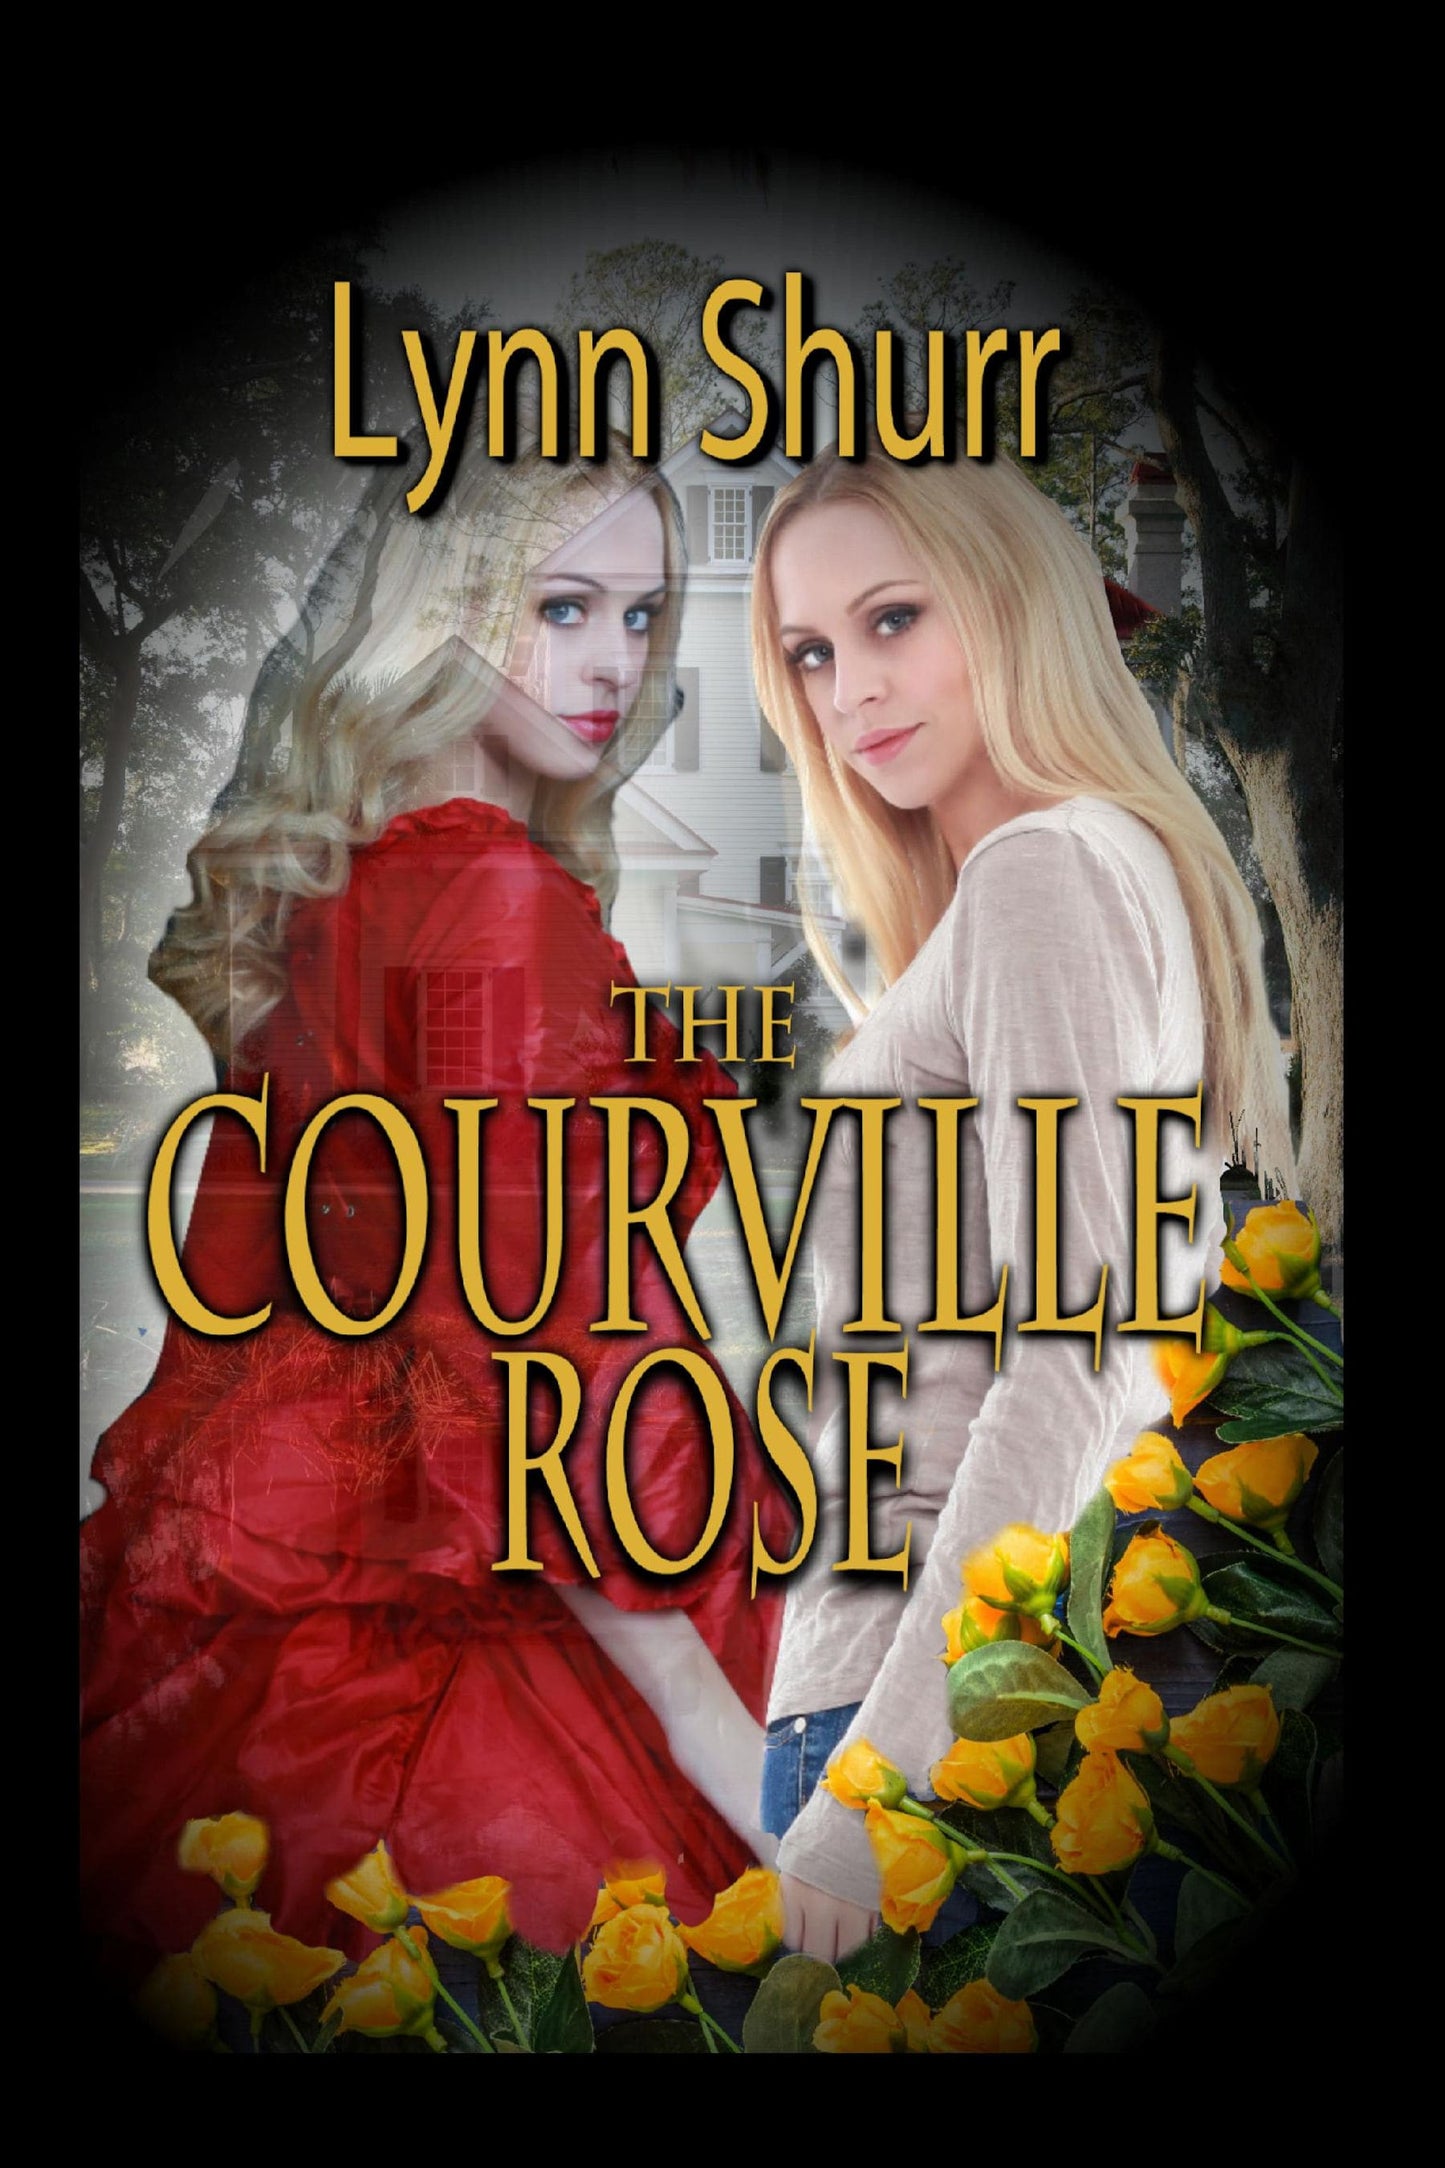 The Courville Rose